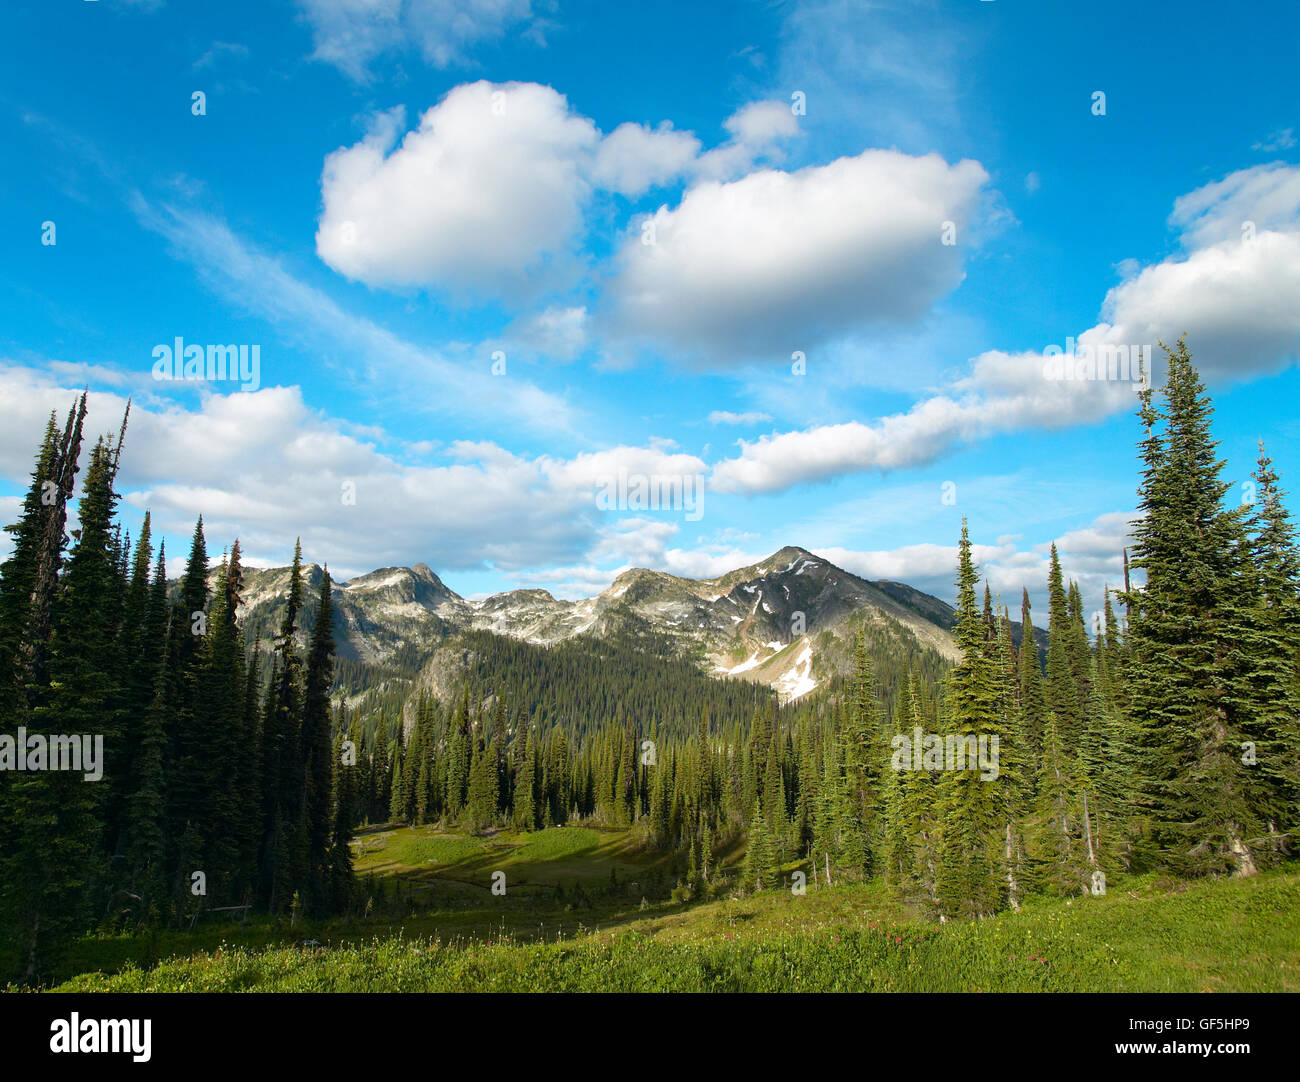 Landscape with forest in British Columbia. Mount Revelstoke. Canada. Horizontal Stock Photo